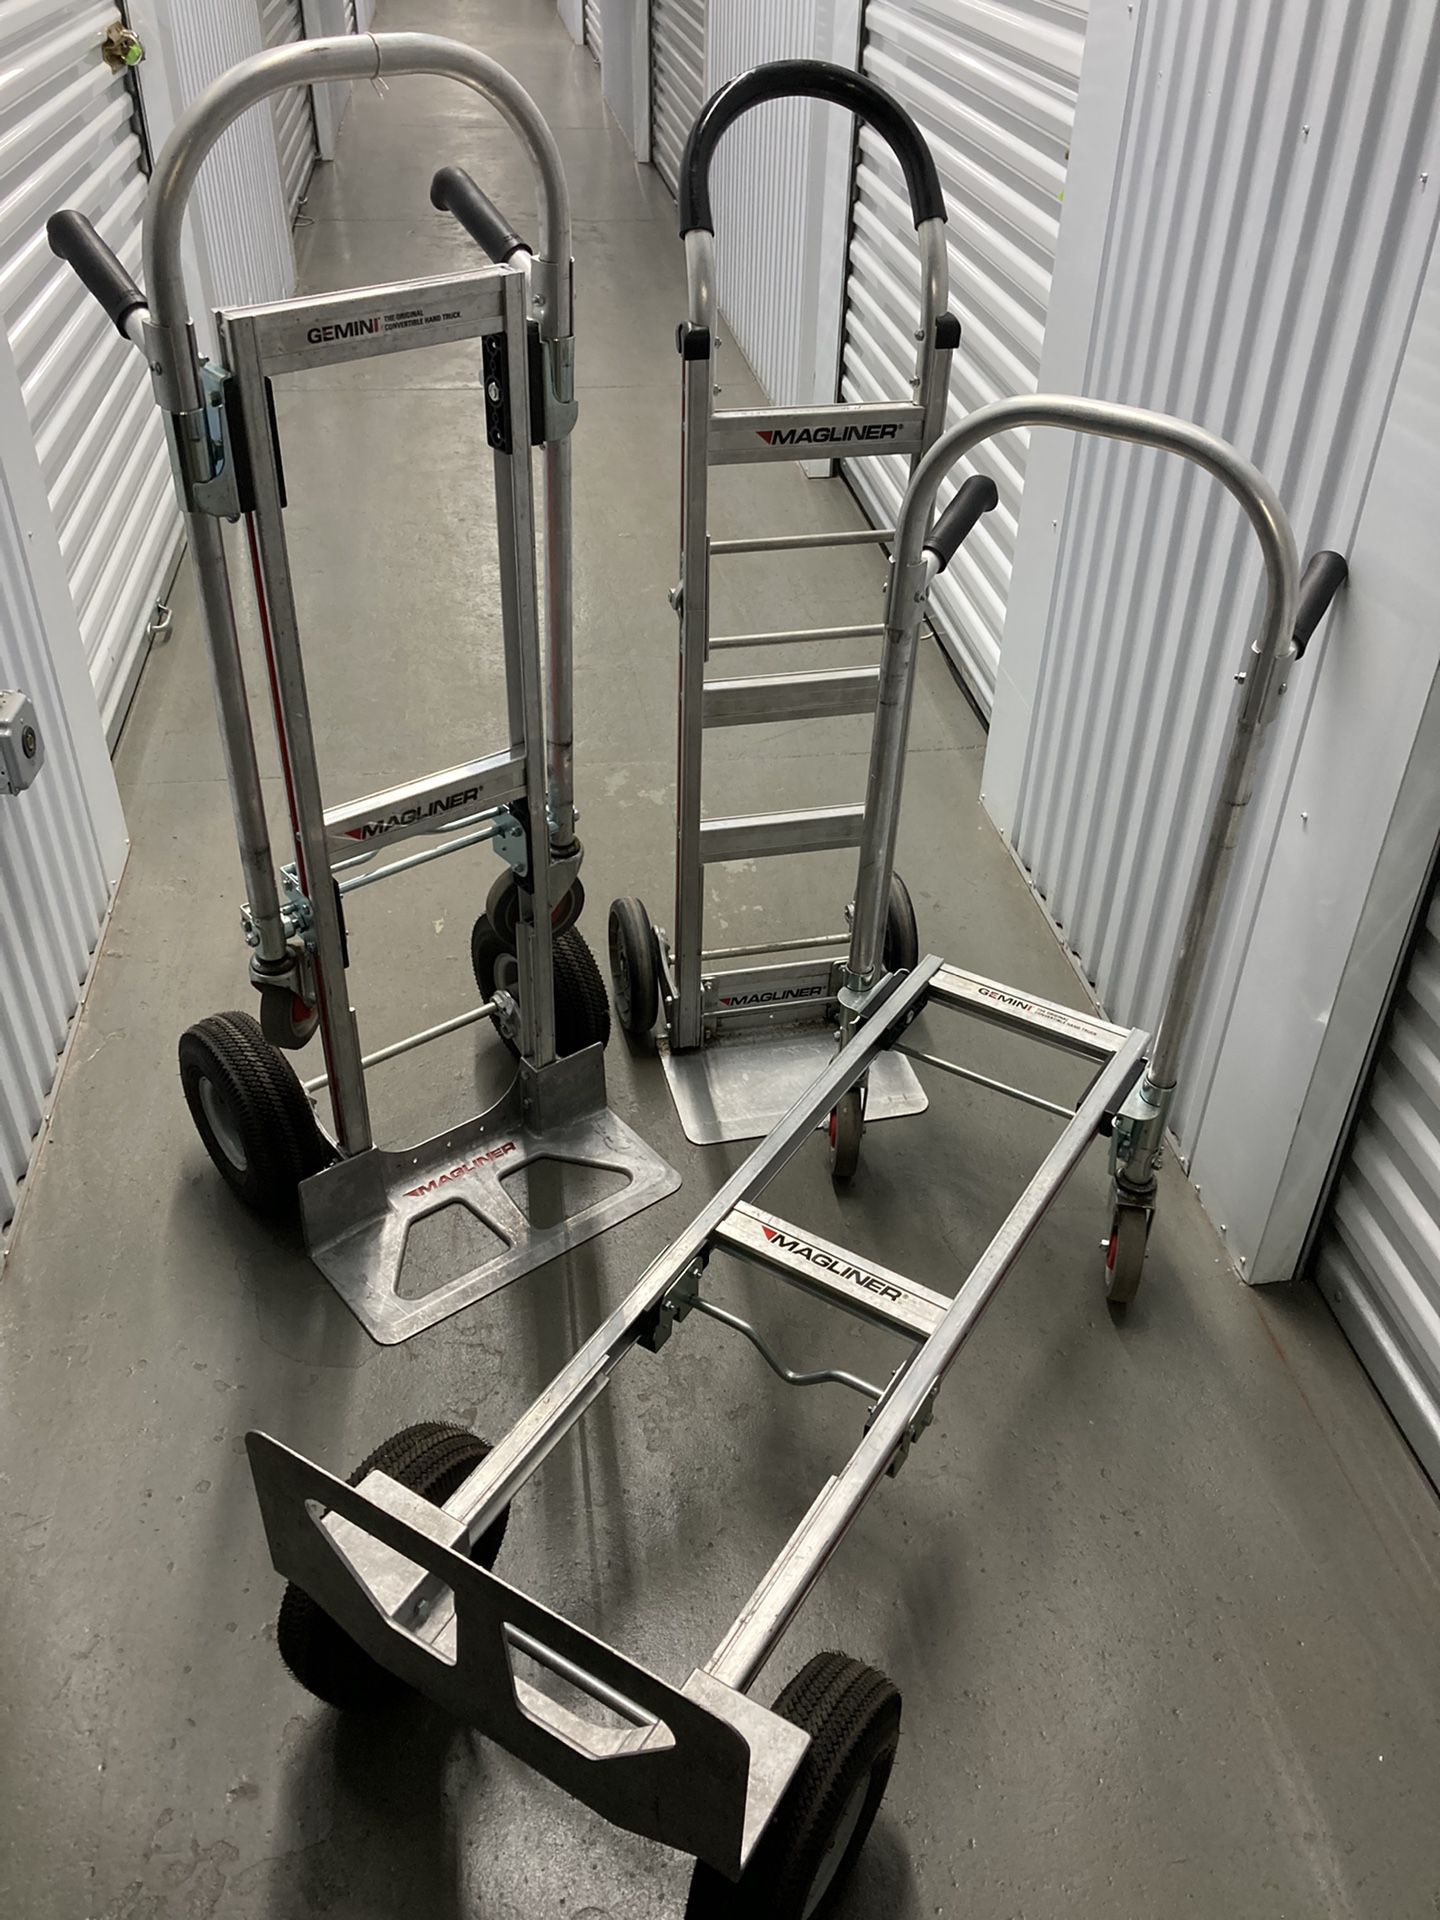  Like New Magliner Gemini JR 500 lb. 2-in-1 Convertible Hand Truck with 10" Pneumatic Wheels and U-Loop Handle Hand Truck 